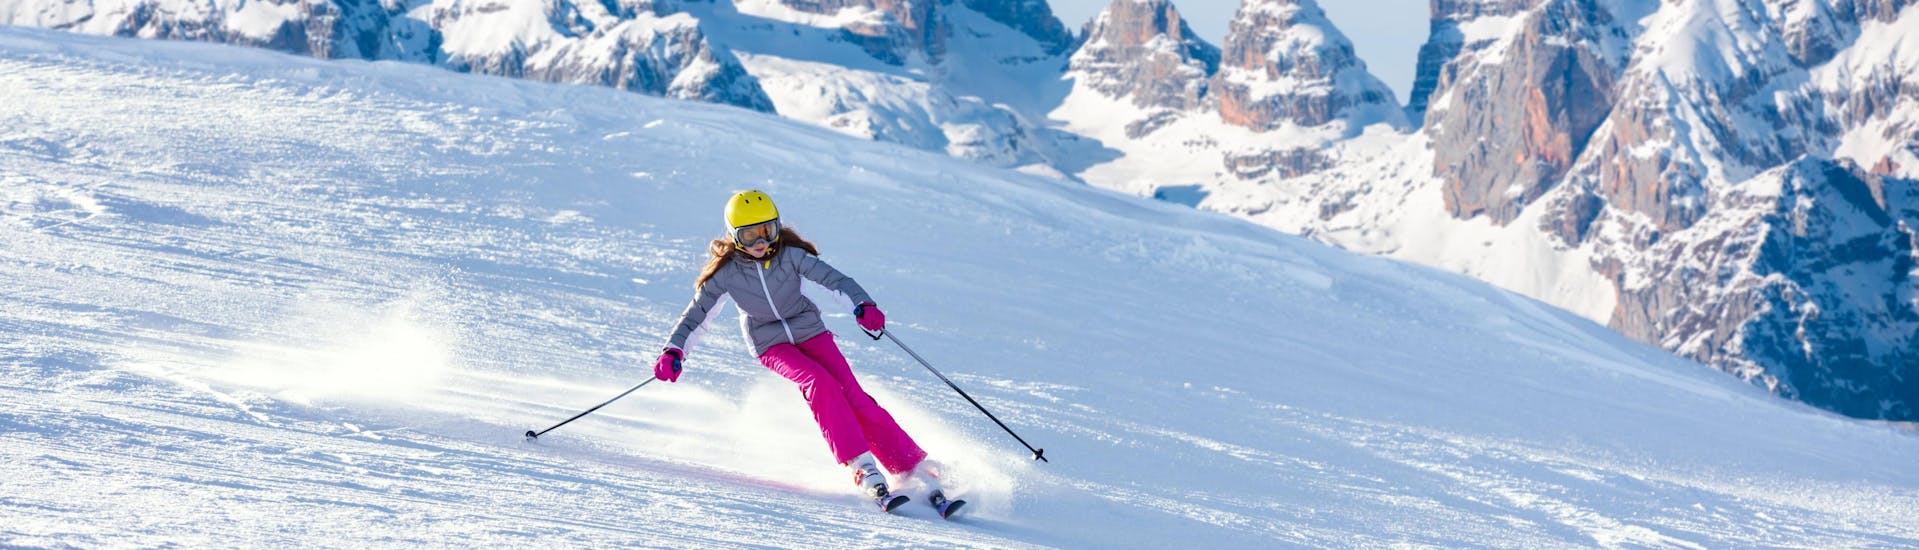 A girl is skiing in the stunning ski resort of Monte Bondone, where local ski schools offer their ski lessons.